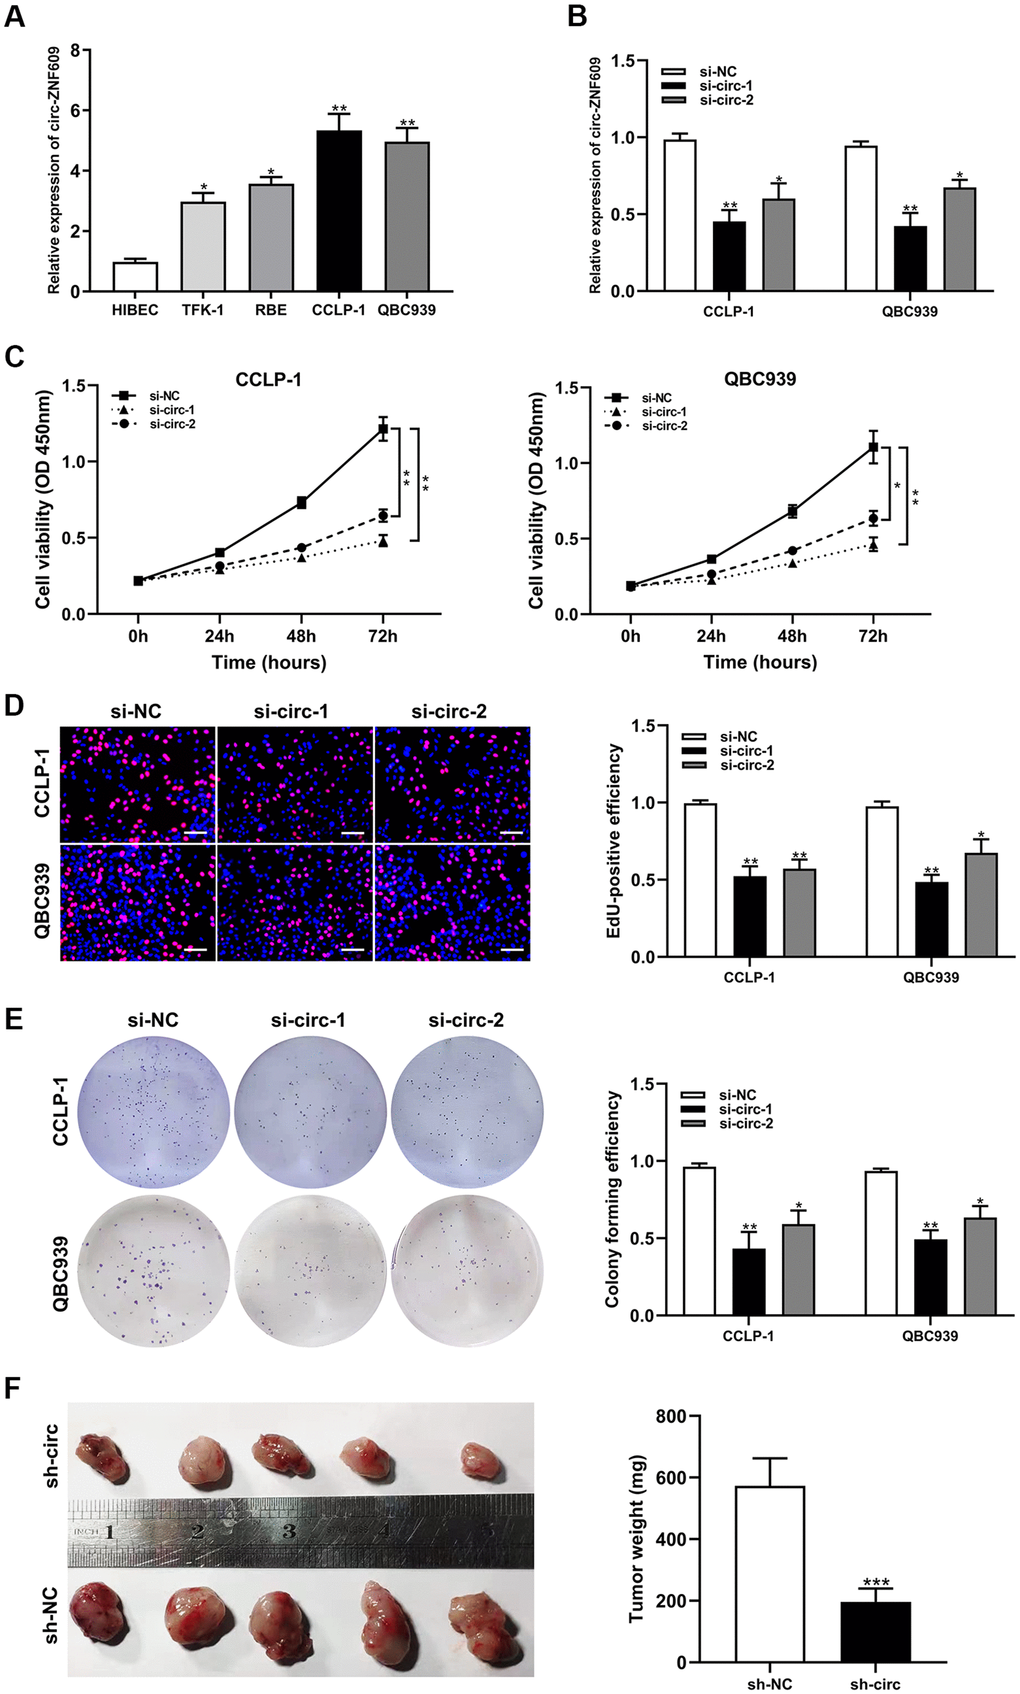 Silencing circ-ZNF609 inhibited the proliferation of cholangiocarcinoma cells. (A) The relative circ-ZNF609 expression in CCLP-1, QBC939, TFK-1, RBE cells and normal HIBEC. (B) The two siRNAs interference efficiency detection of circ-ZNF609. (C–E) CCK-8 assay, EdU and colony formation assay were used to detect the proliferation ability of CCA cells after circ-ZNF609 knockdown. (F) Tumor xenograft assay was used to measure tumor growth after silencing circ-ZNF609 in vivo. *PPP